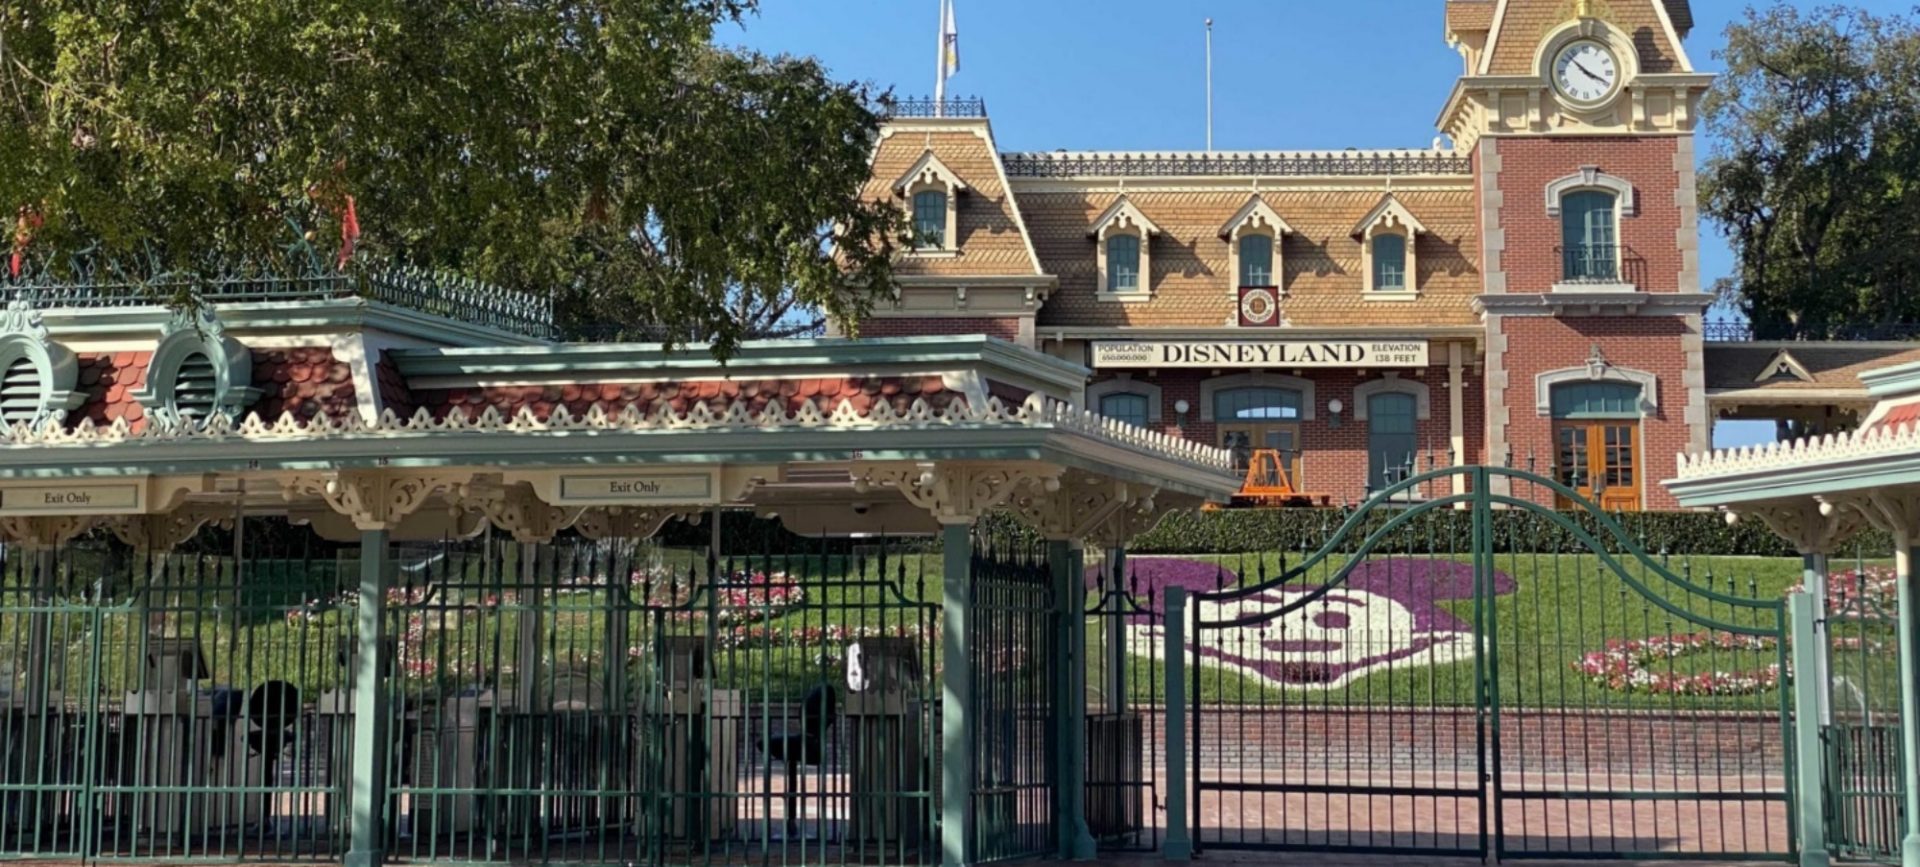 Disneyland announces additional furloughs as parks remain closed